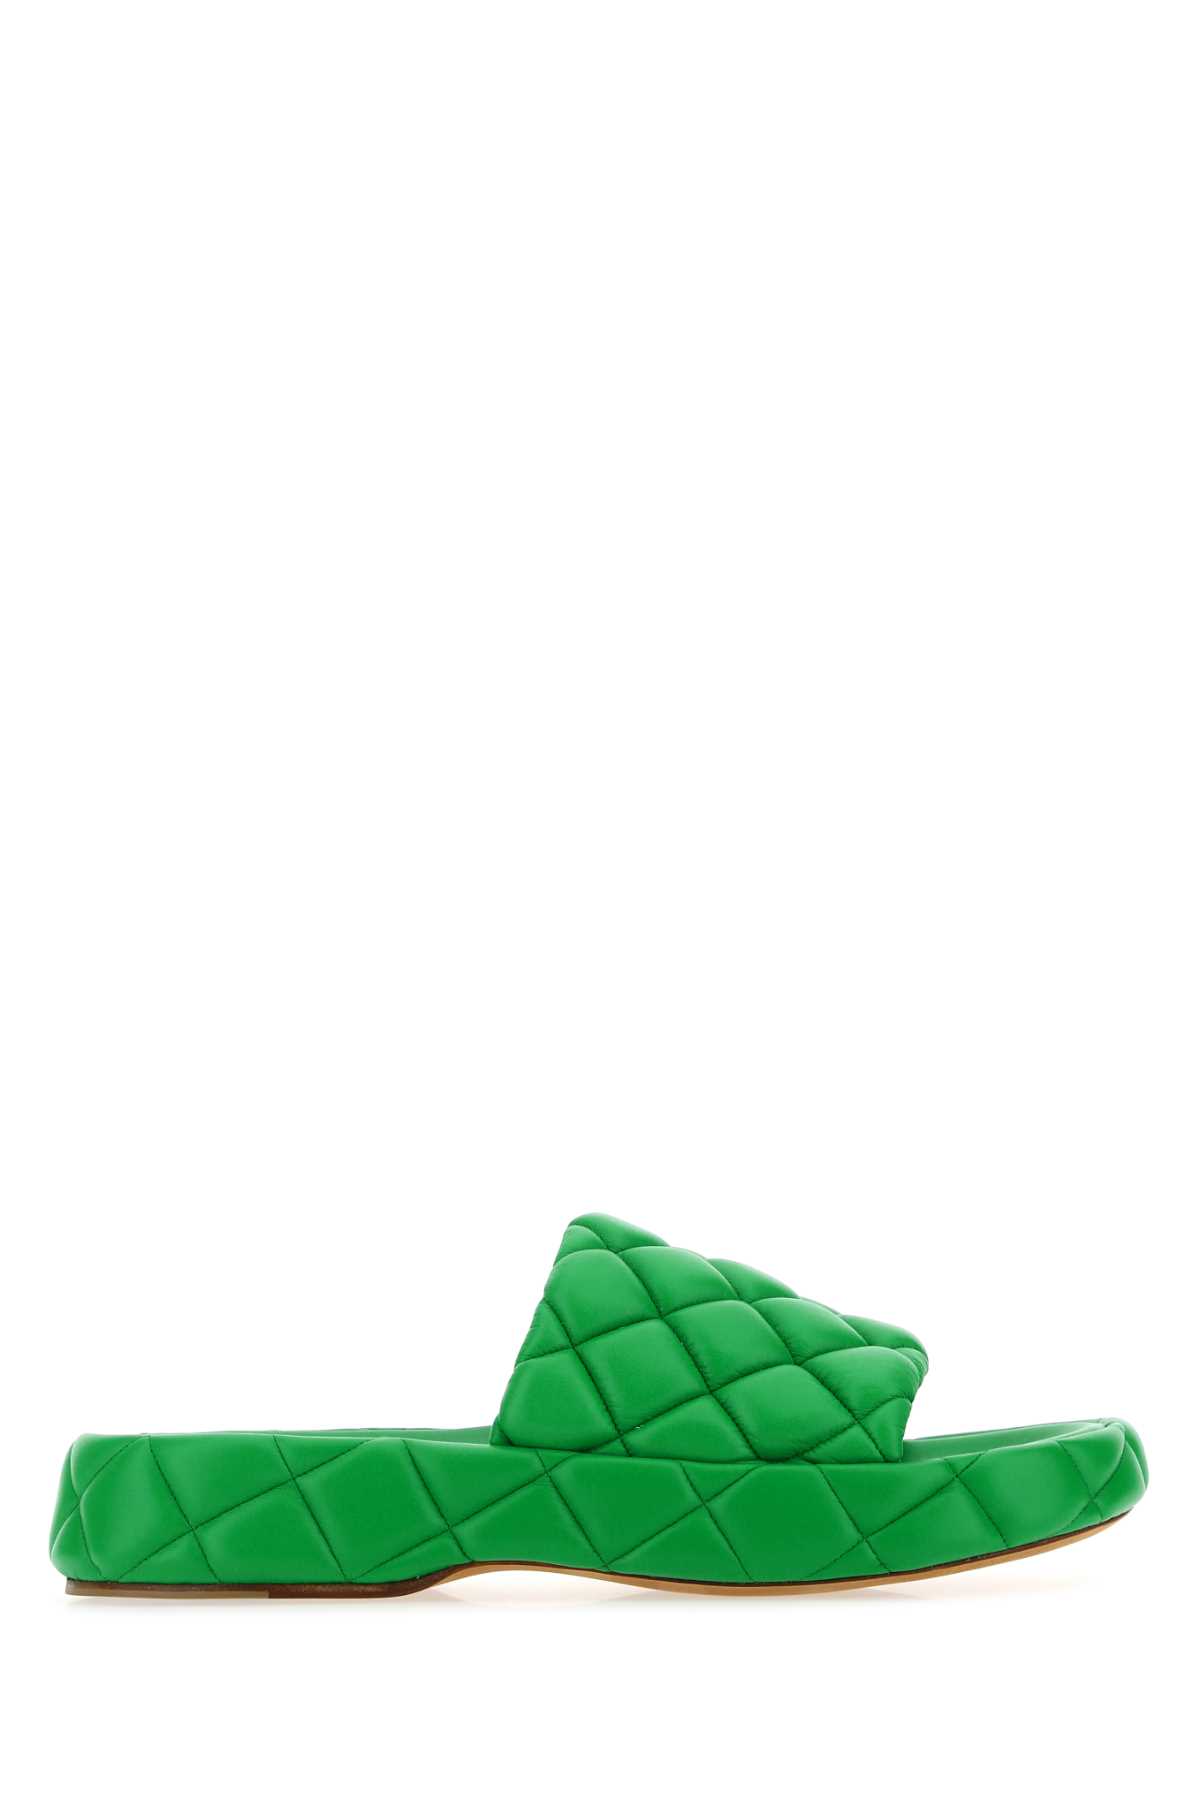 Grass Green Leather Padded Sandals